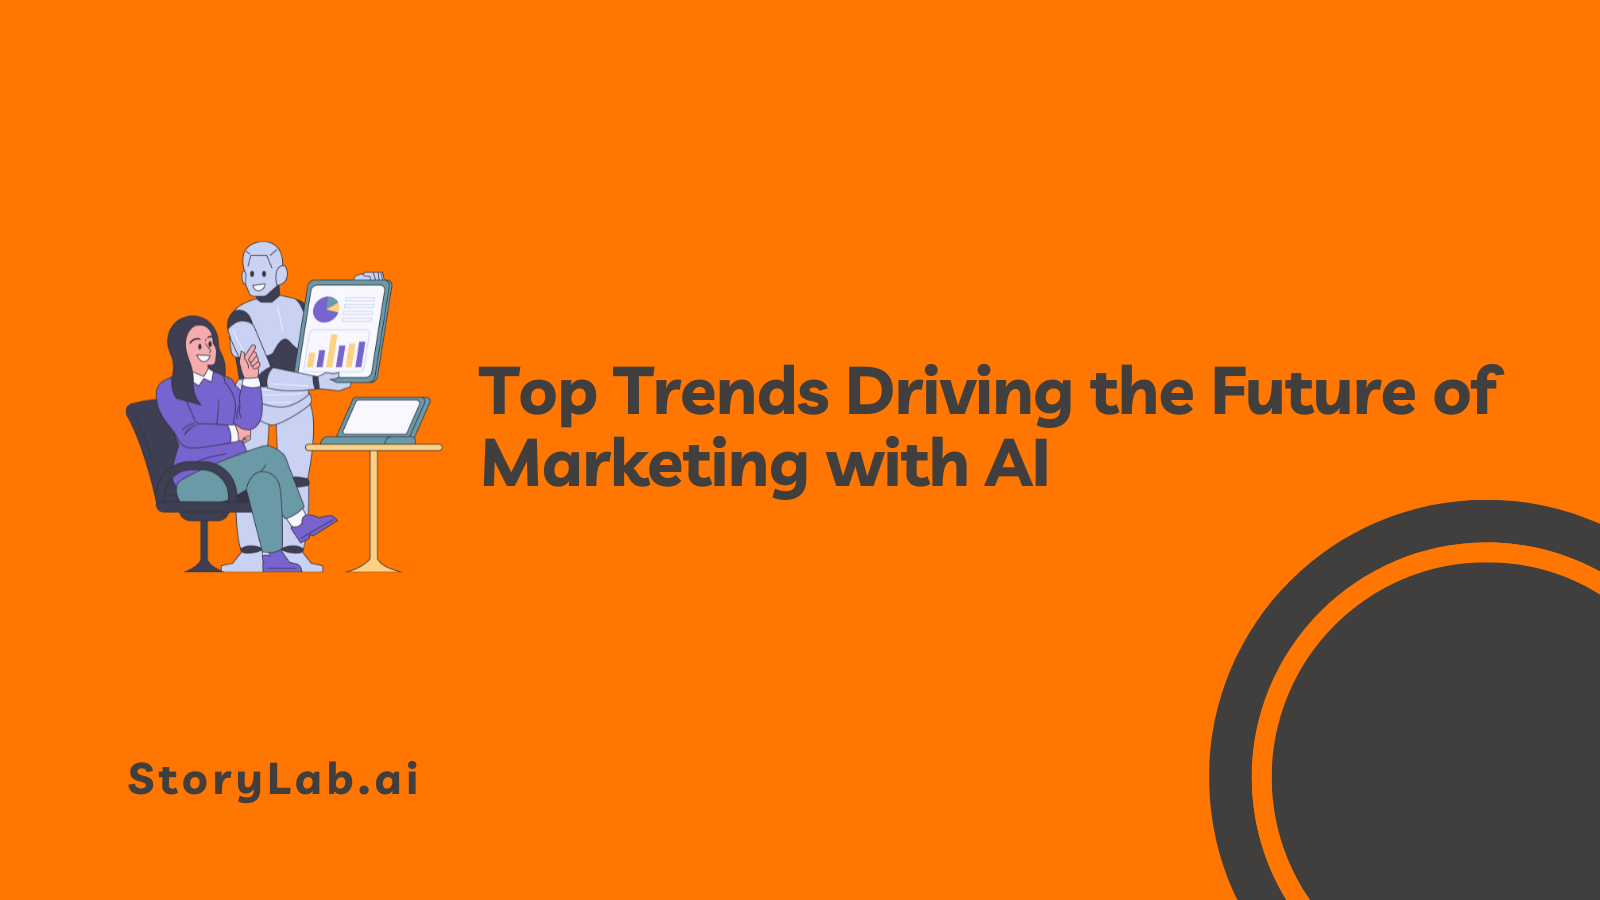 Top Trends Driving the Future of Marketing with AI